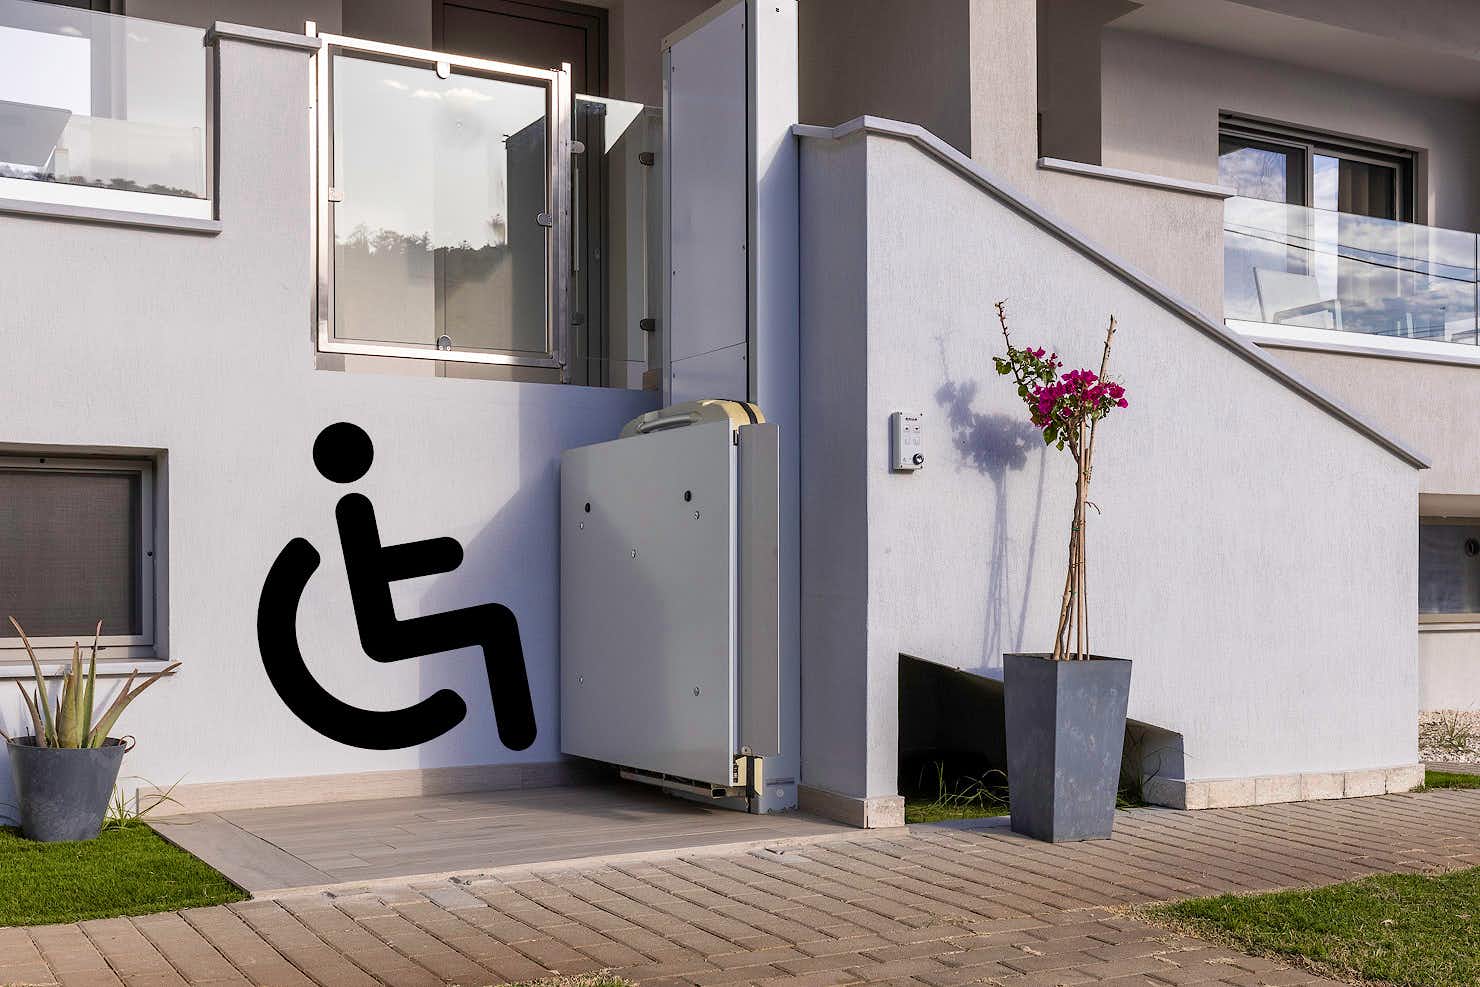 Photo Caption: Disability Access Come & Go Effortlessly Our wheel